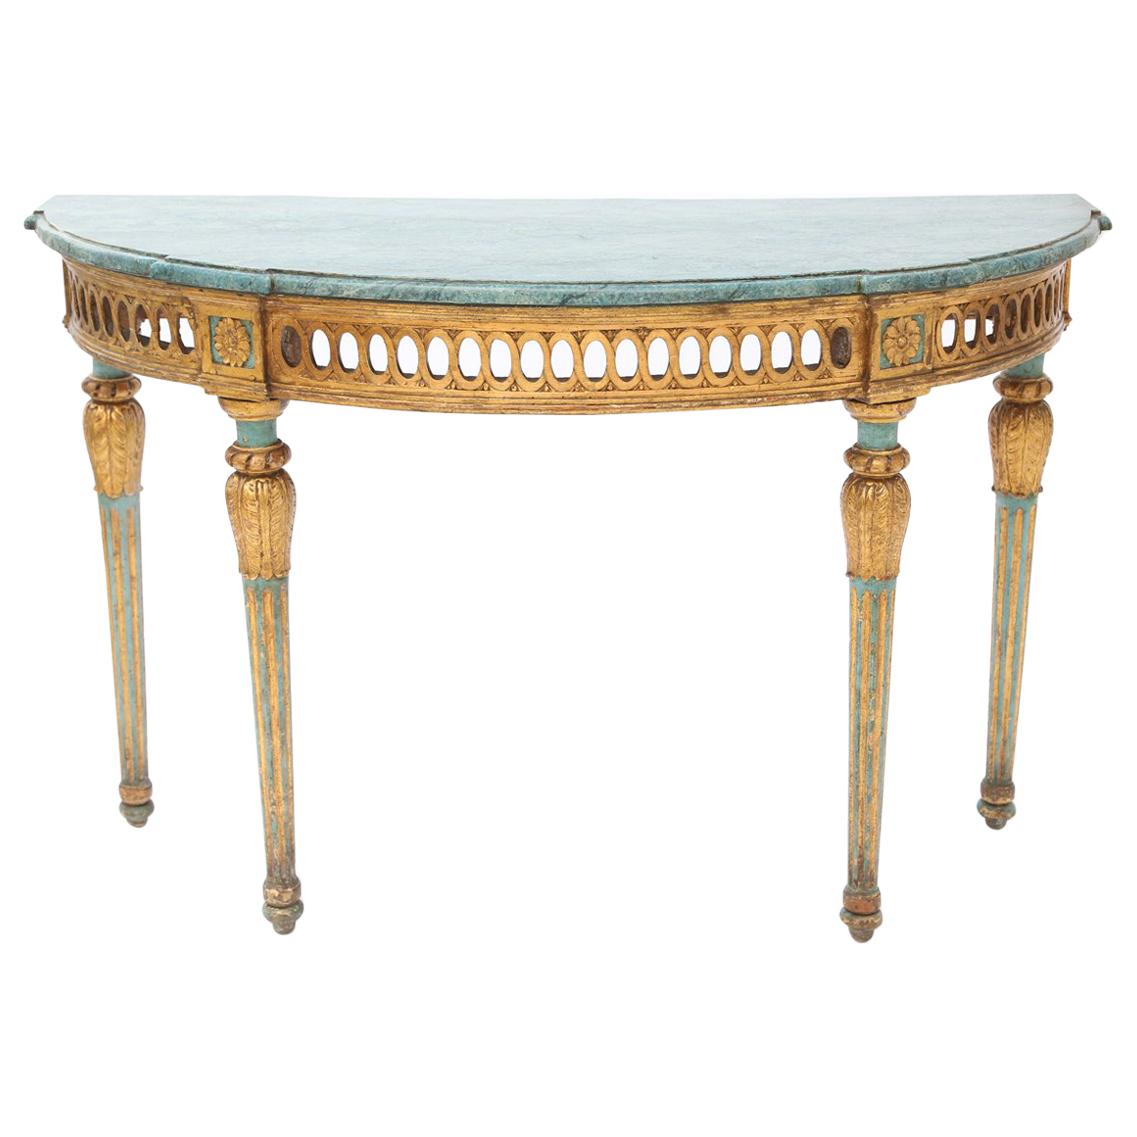 18th Century Italian Demilune Console with Marbleize Top in Robin's Egg Blue